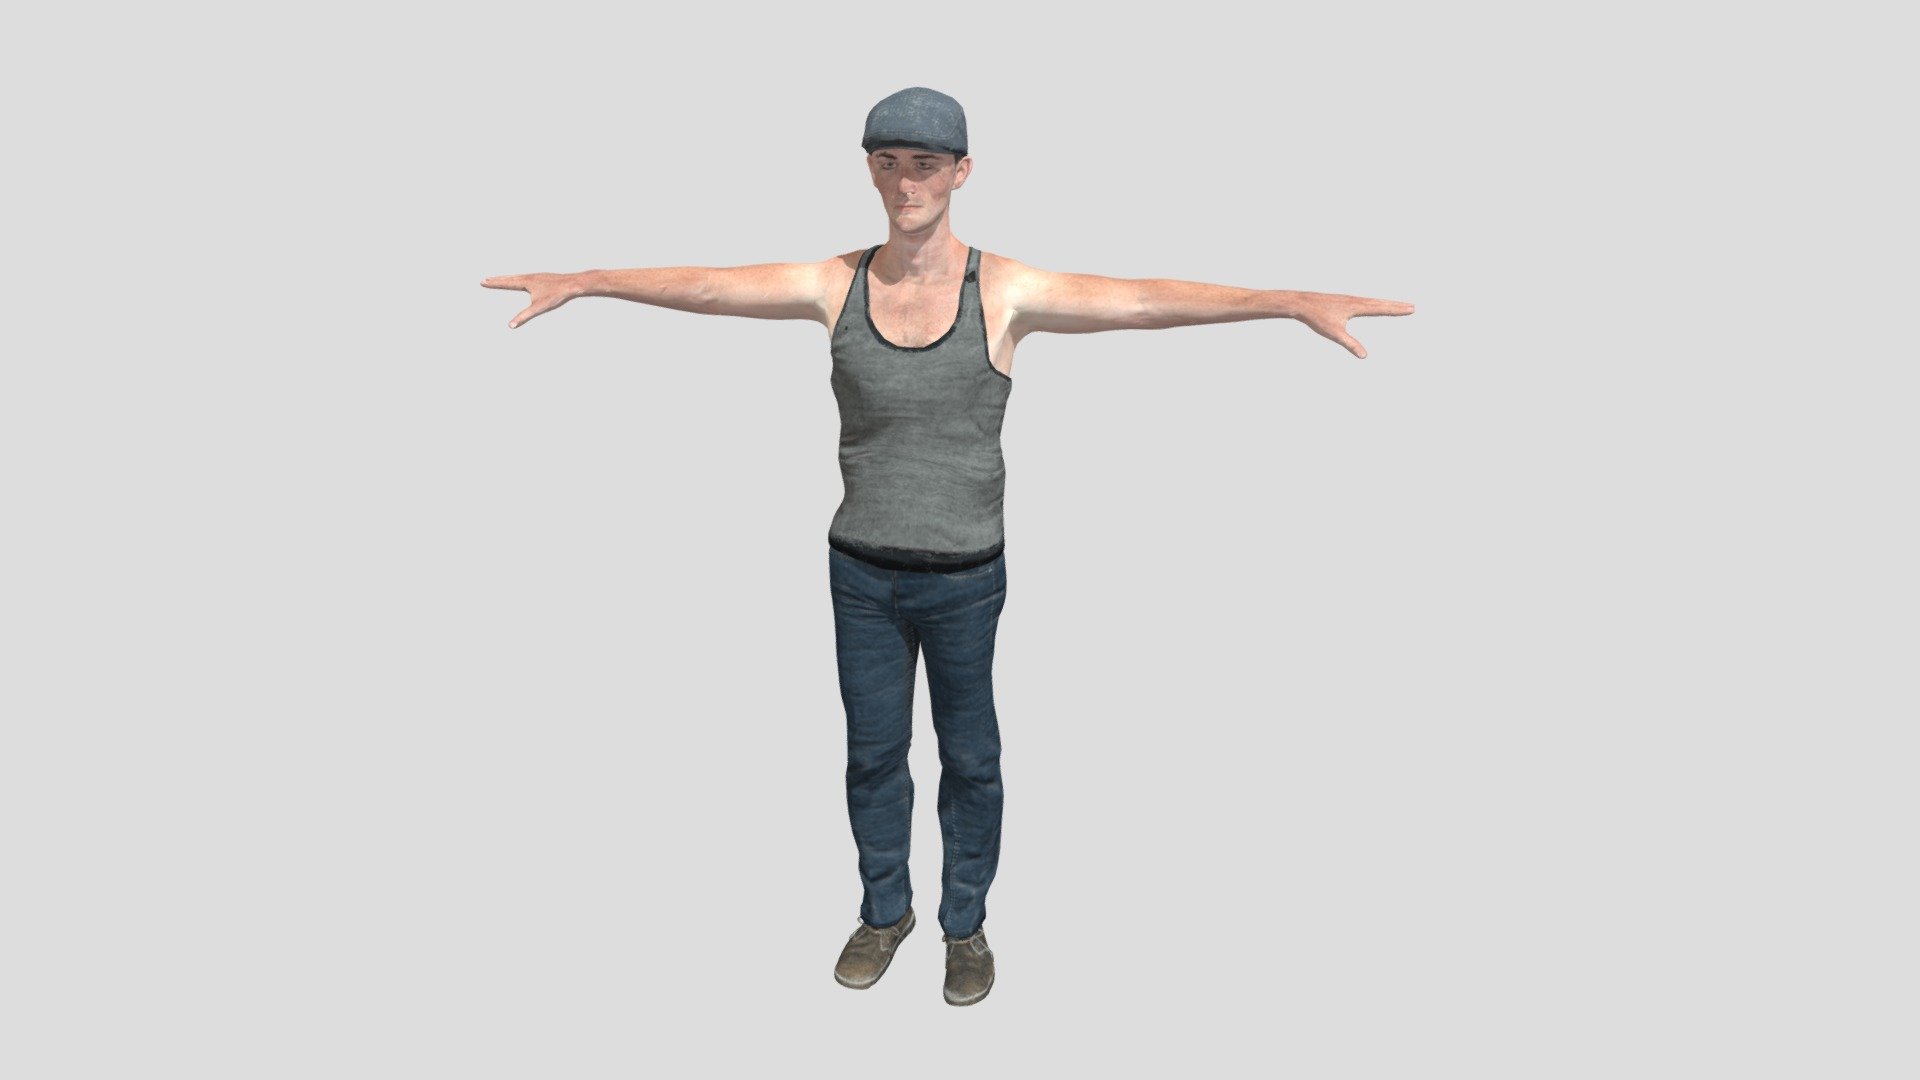 Just a Male character, named Peter. Adobe Fuse + MixamoRig Rigged 3dmodel Fbx, Dae formats Separate textures for Body, Top, Bottoms, Shoes and Hair: Diffuse, Normal, Gloss, Opacity, Specular.

Plus Fbx LOD Model: LOD0 -35266p/18449v; LOD1 - 17971p/9658v; LOD2 - 7651p/4383v - Peter - LOD Man character - Download Free 3D model by Egunoff 3d model